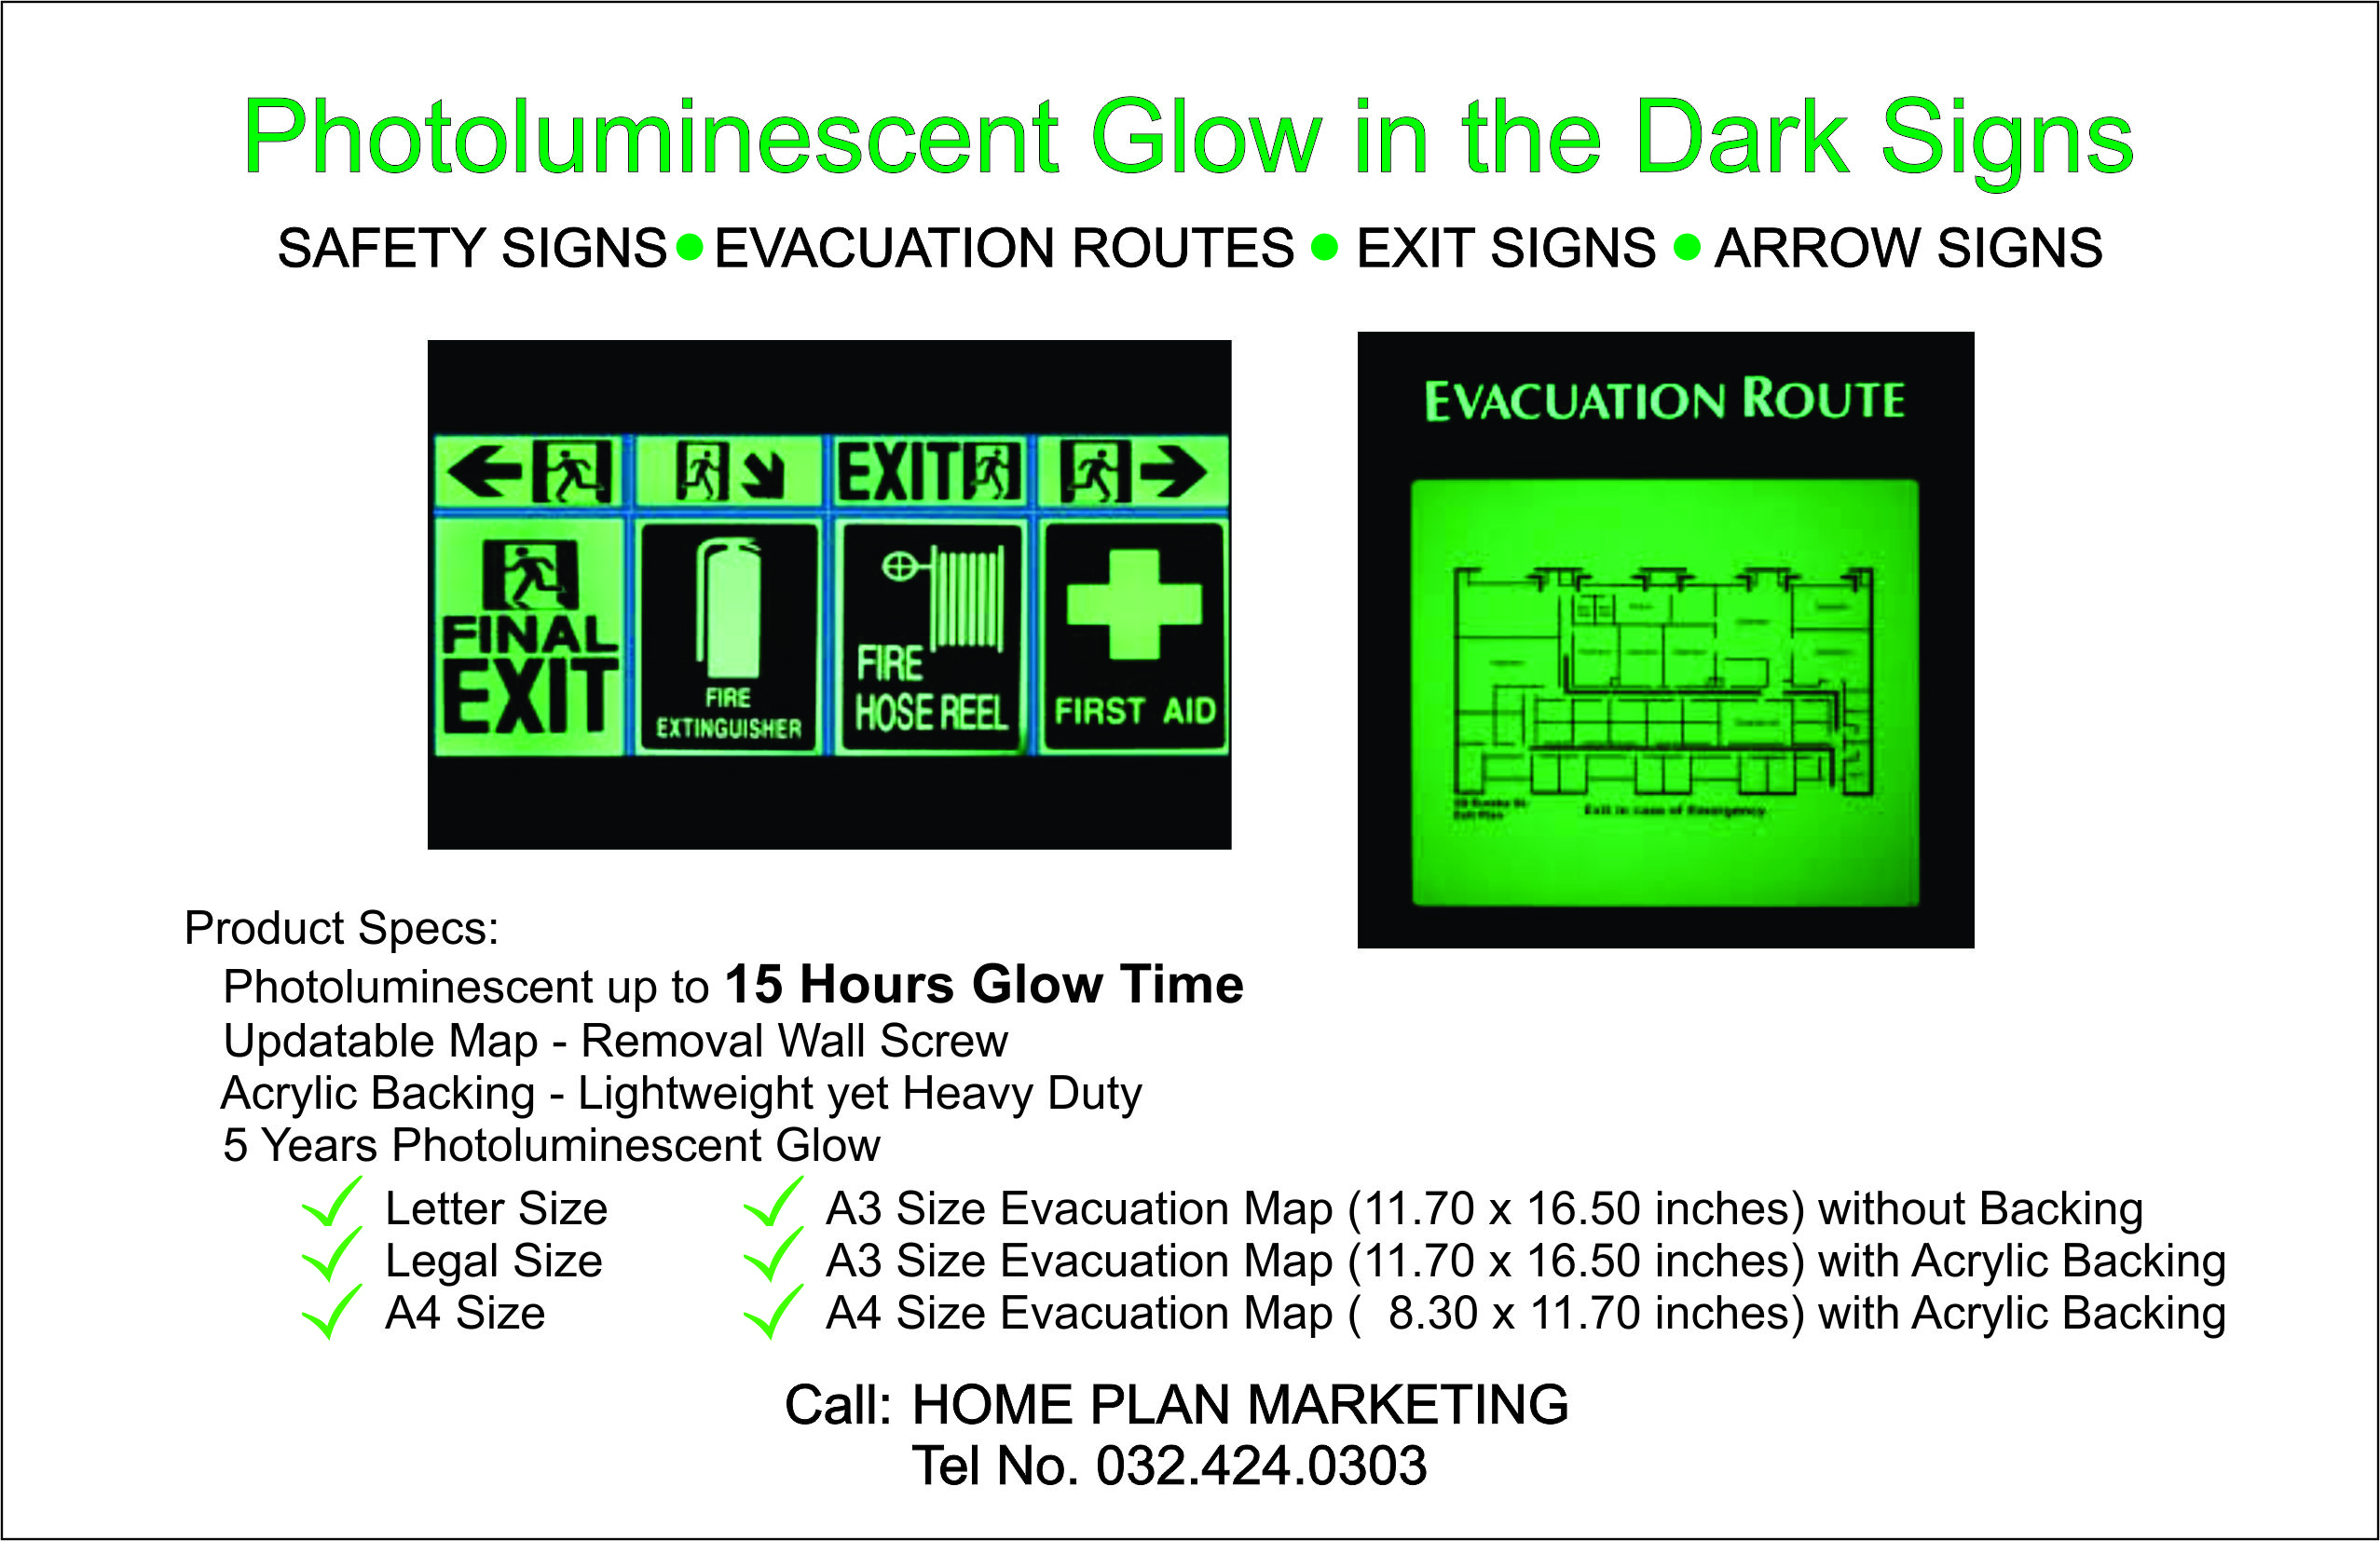 Photoluminescent Glow in the Dark Signs